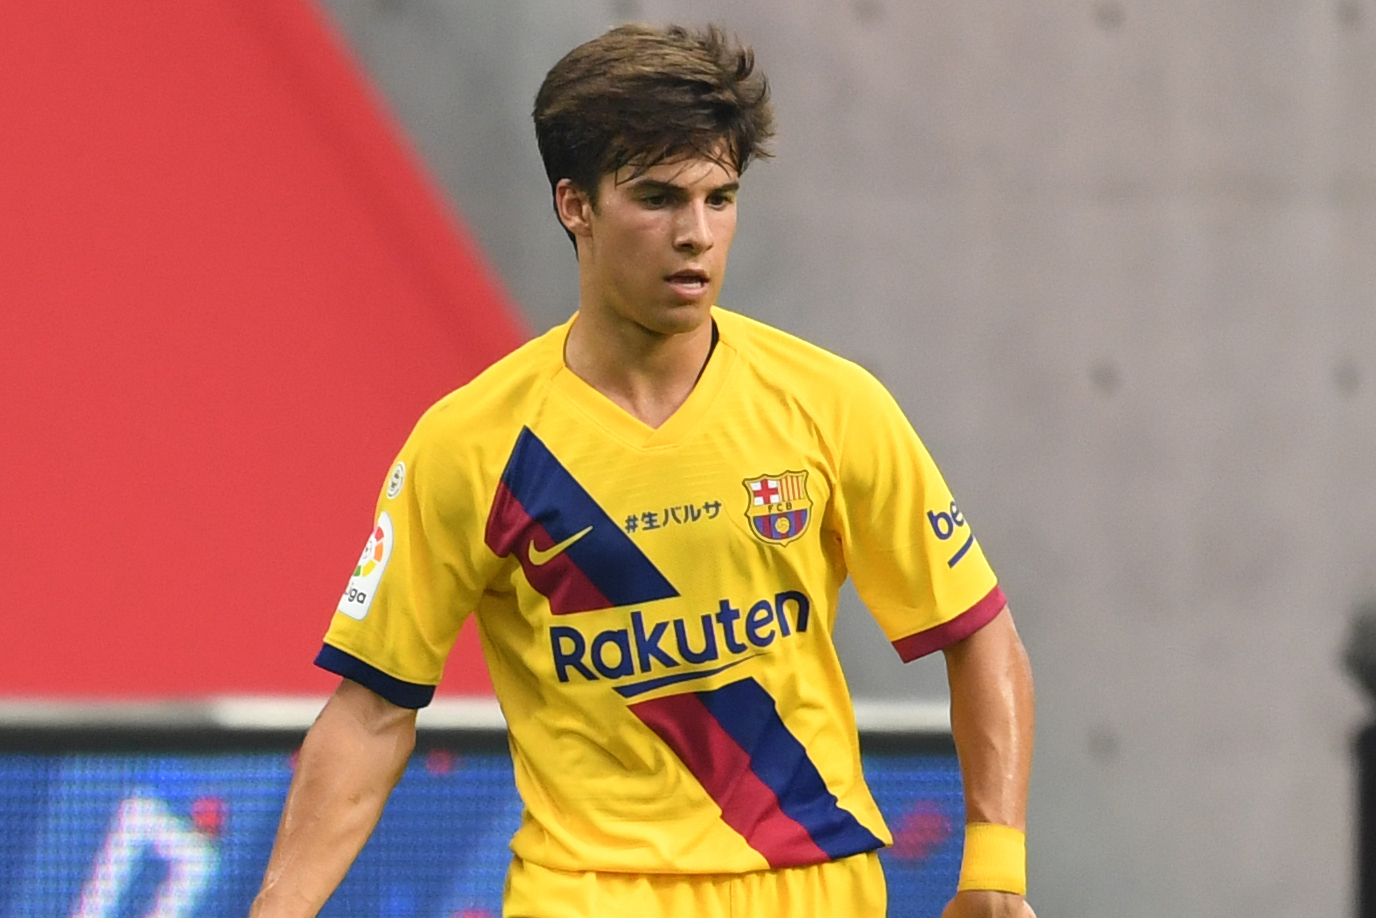 Barcelona S La Masia Is Not Producing 1st Team Players Can It Be Fixed Bleacher Report Latest News Videos And Highlights